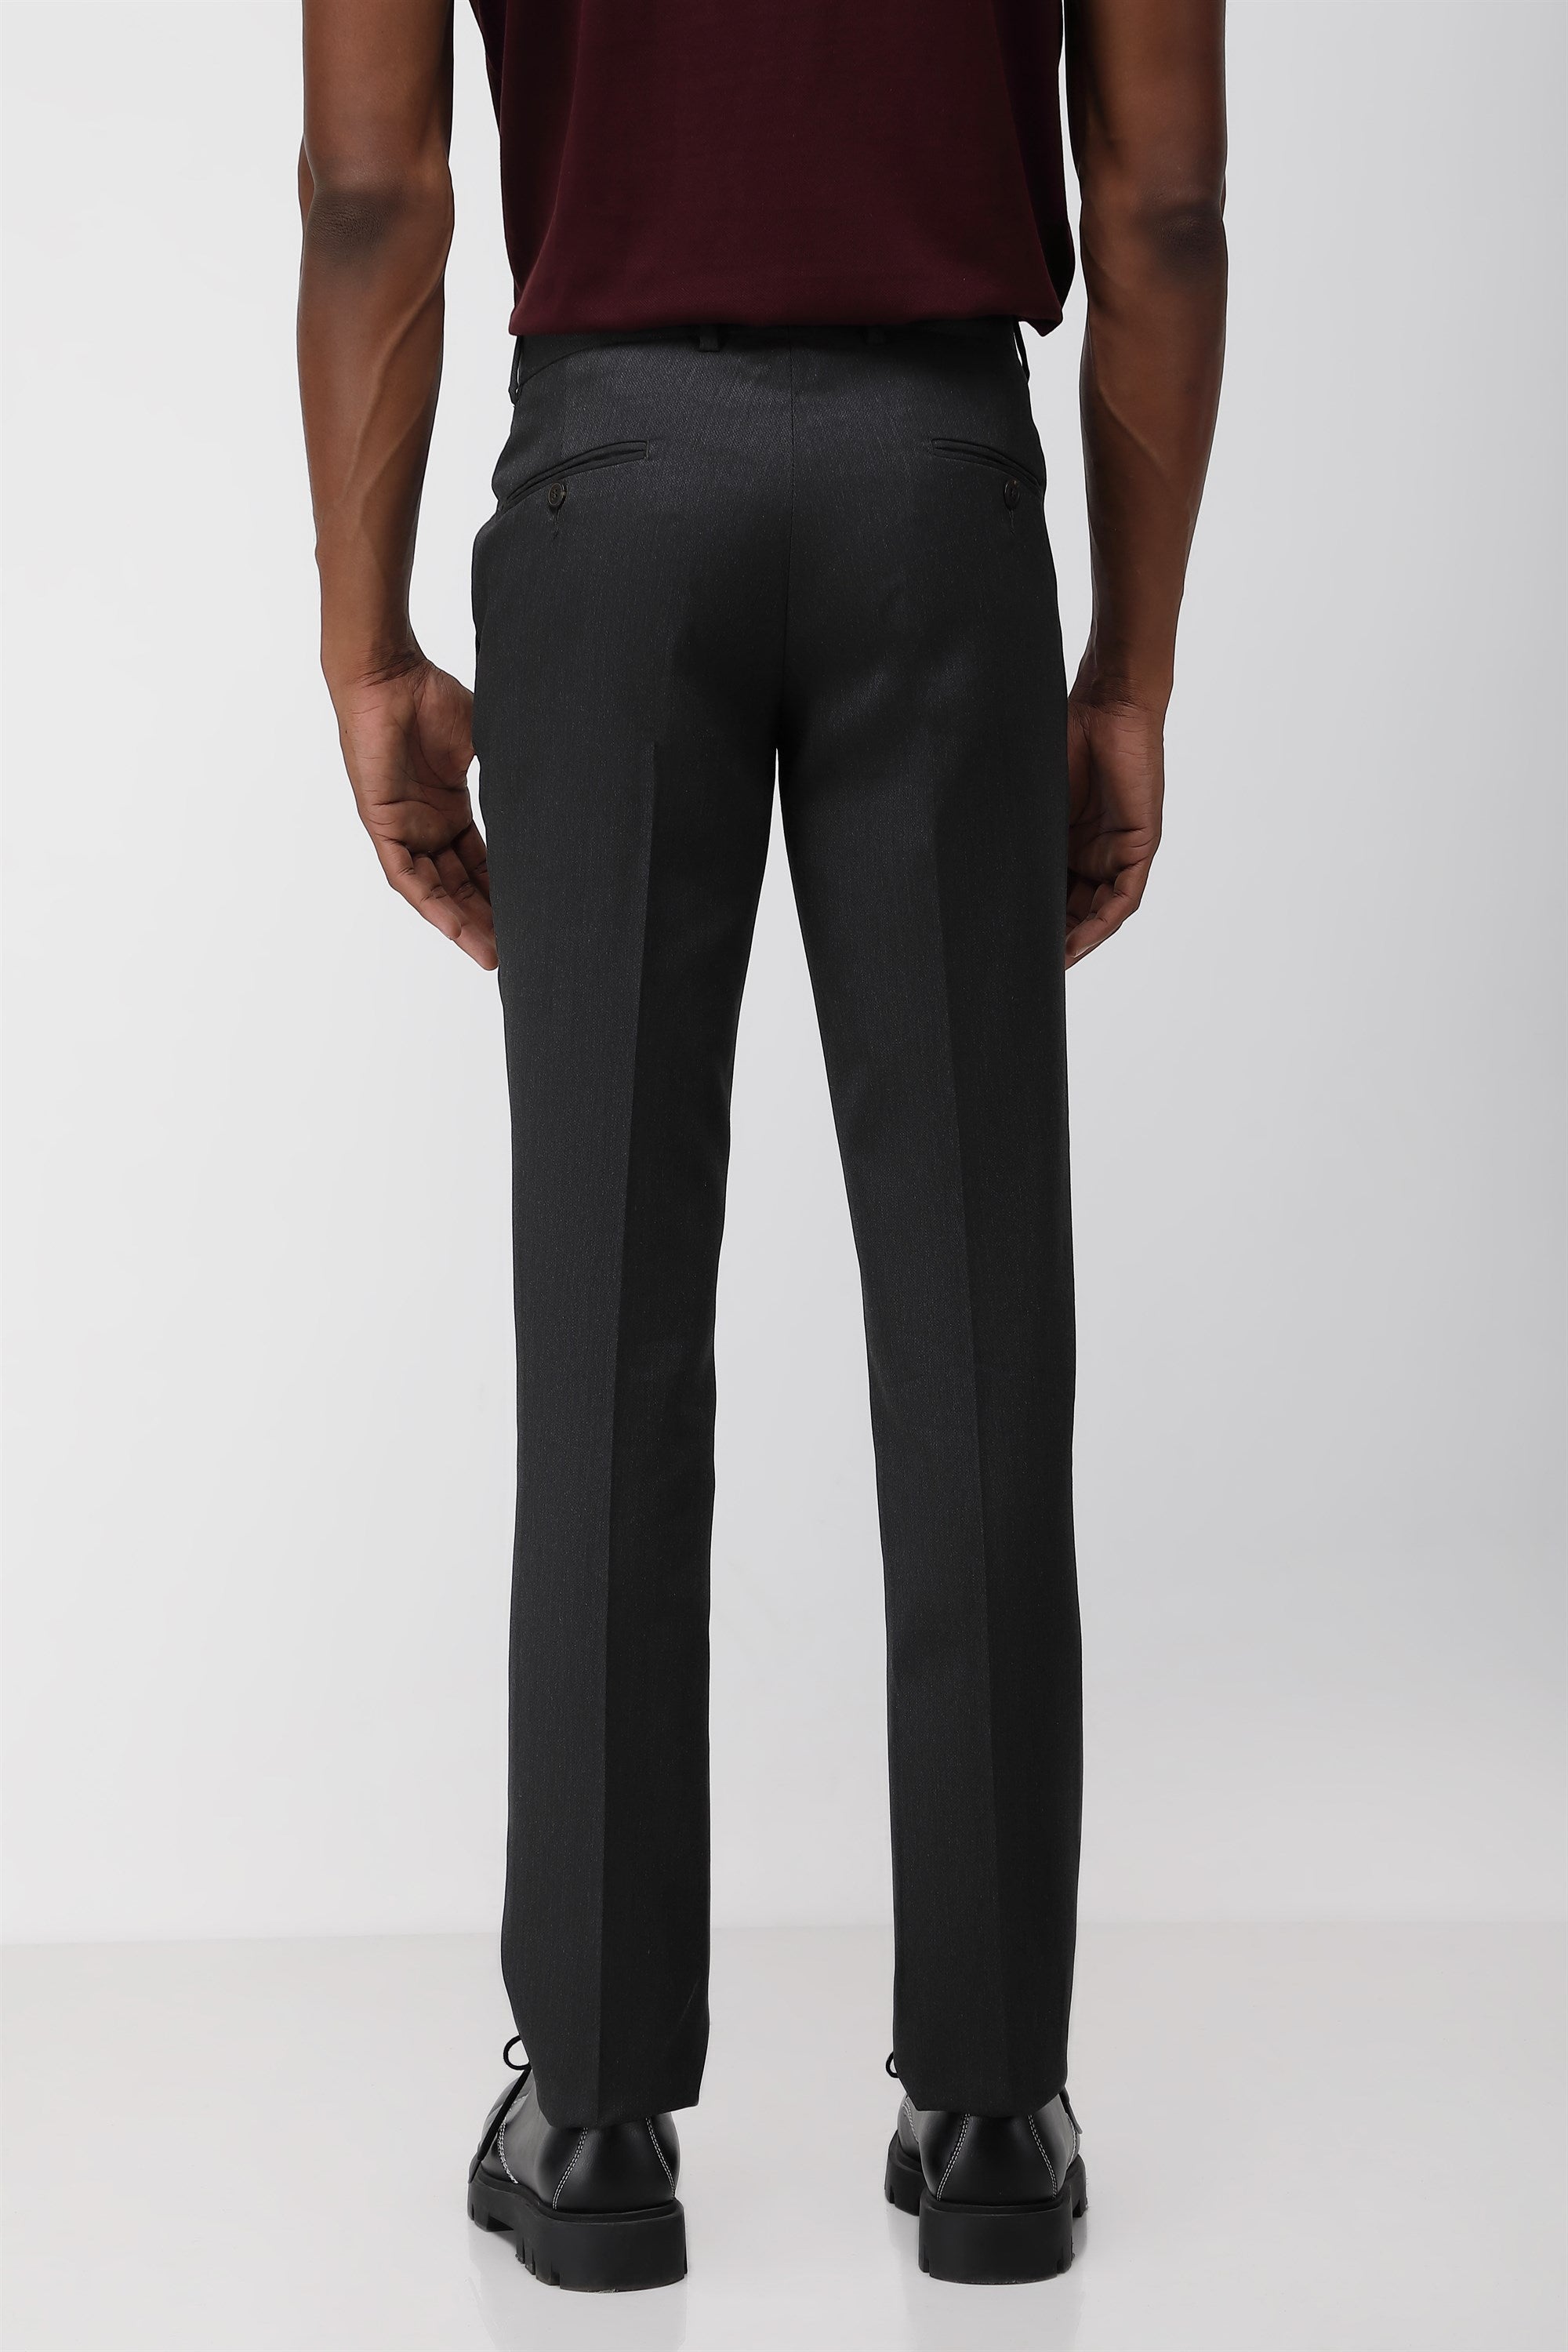 T the brand Stretch Formal Flat Front Trouser - Grey